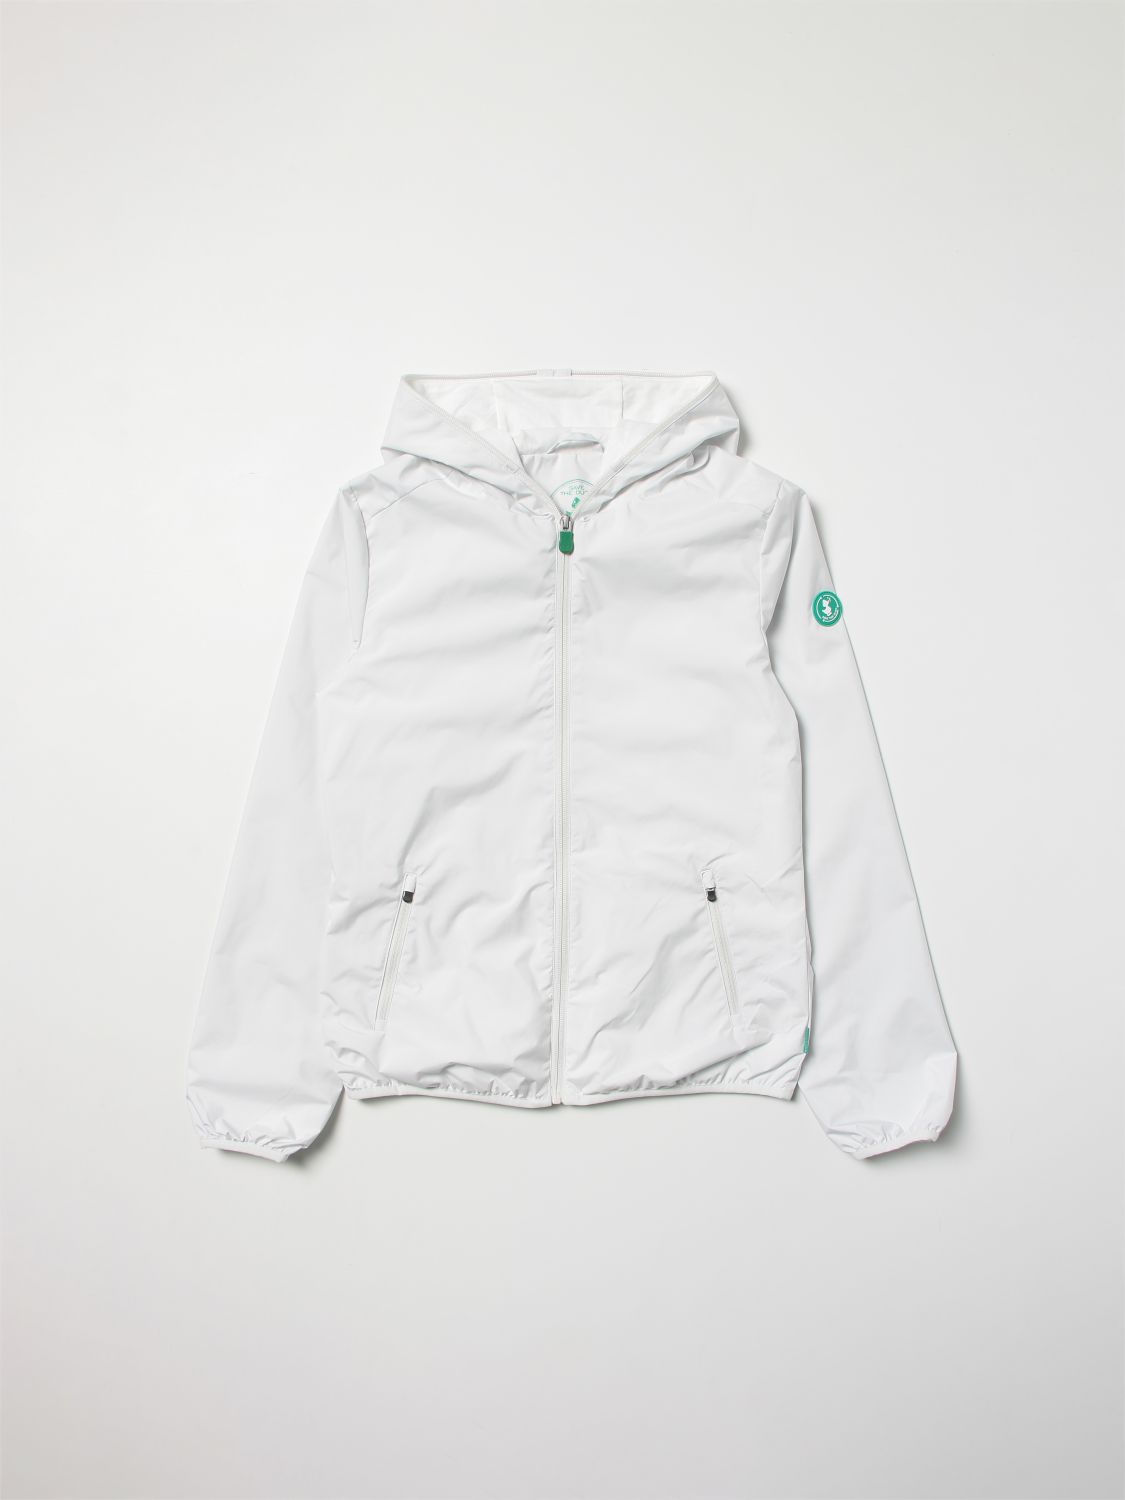 Jacket Save The Duck: Jacket kids Save The Duck white 1